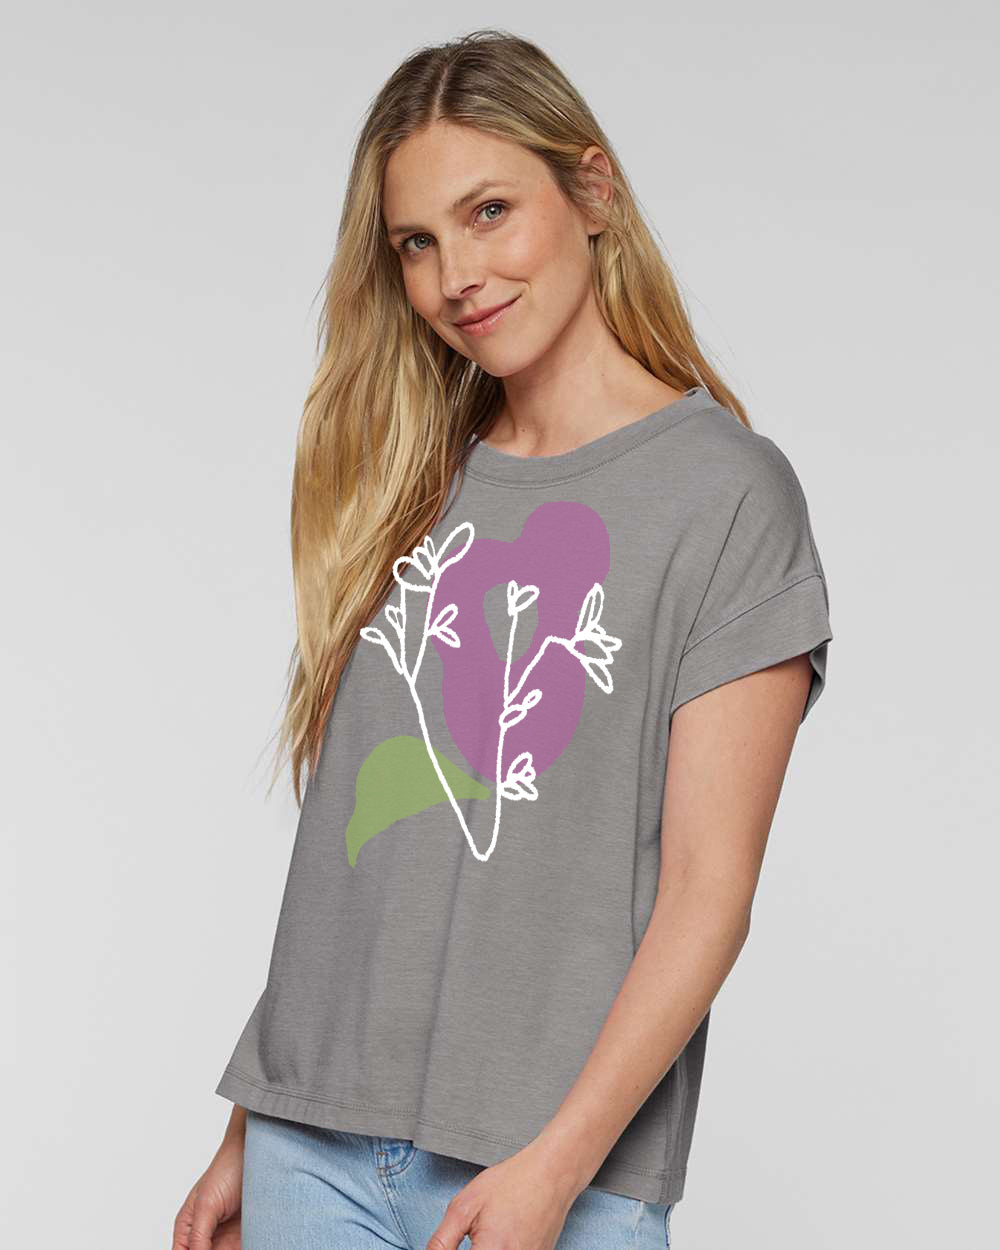 Abstract Floral : Women's Relaxed Vintage Wash Tee (Gray)